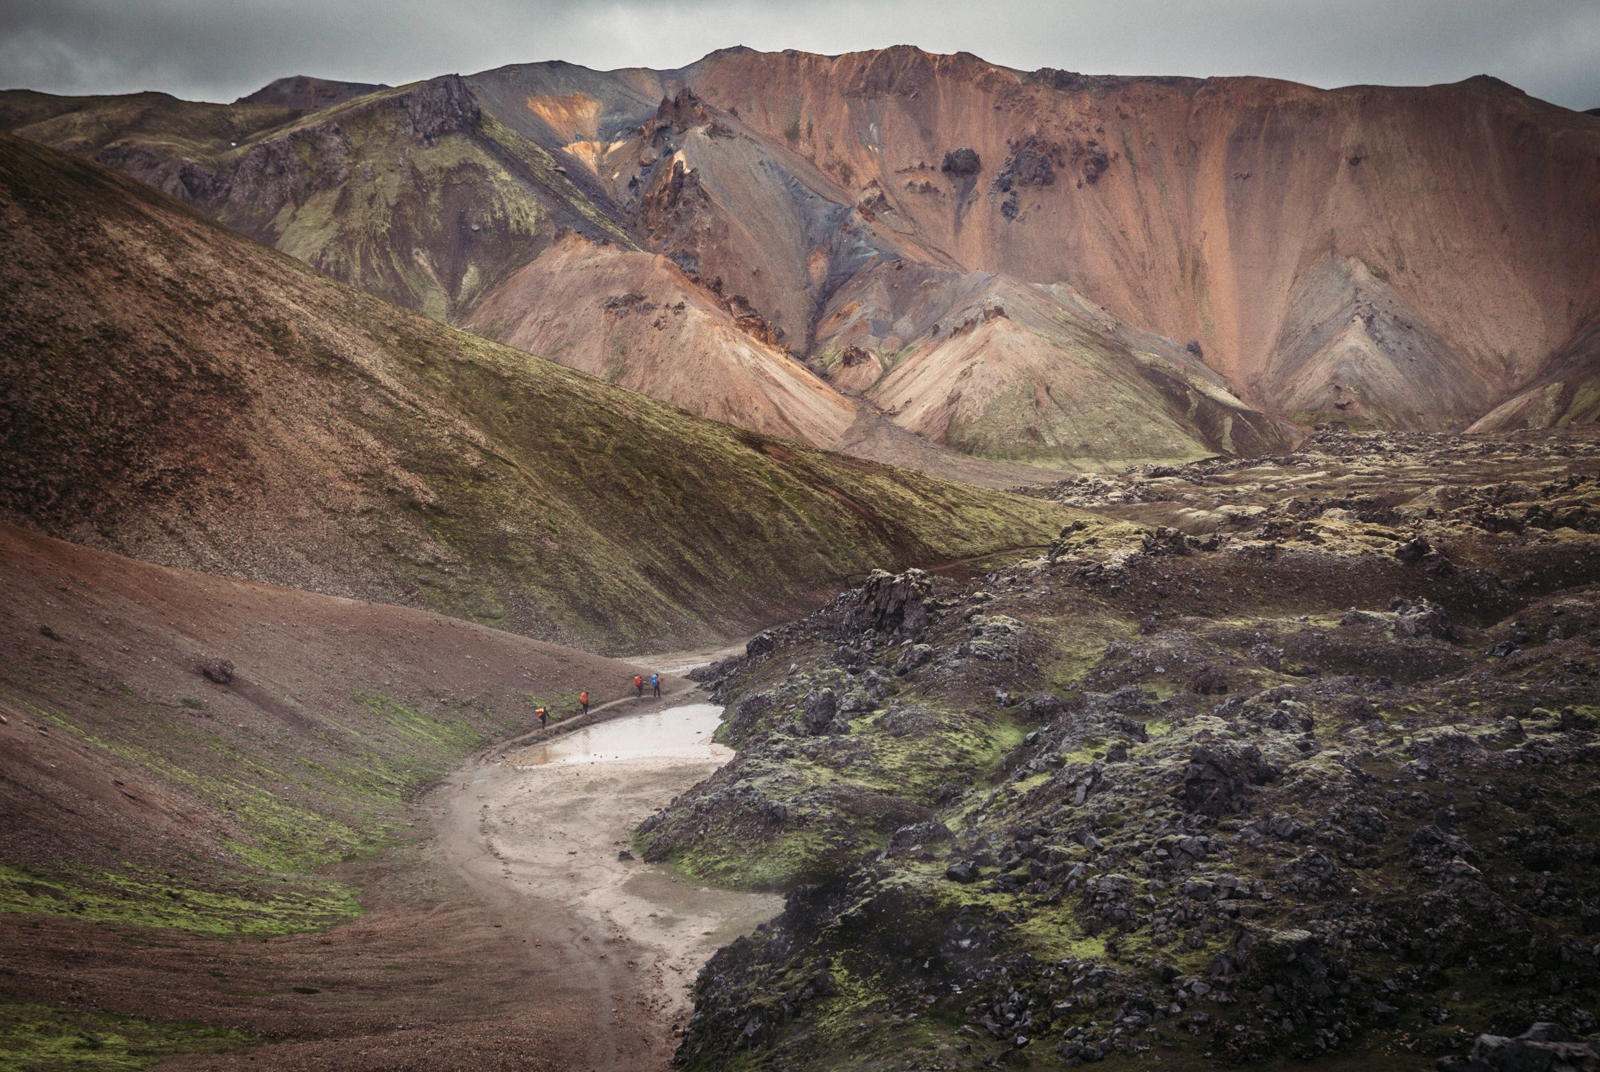 See the beauty of Landmannalaugar on this trek in the Highlands of Iceland.